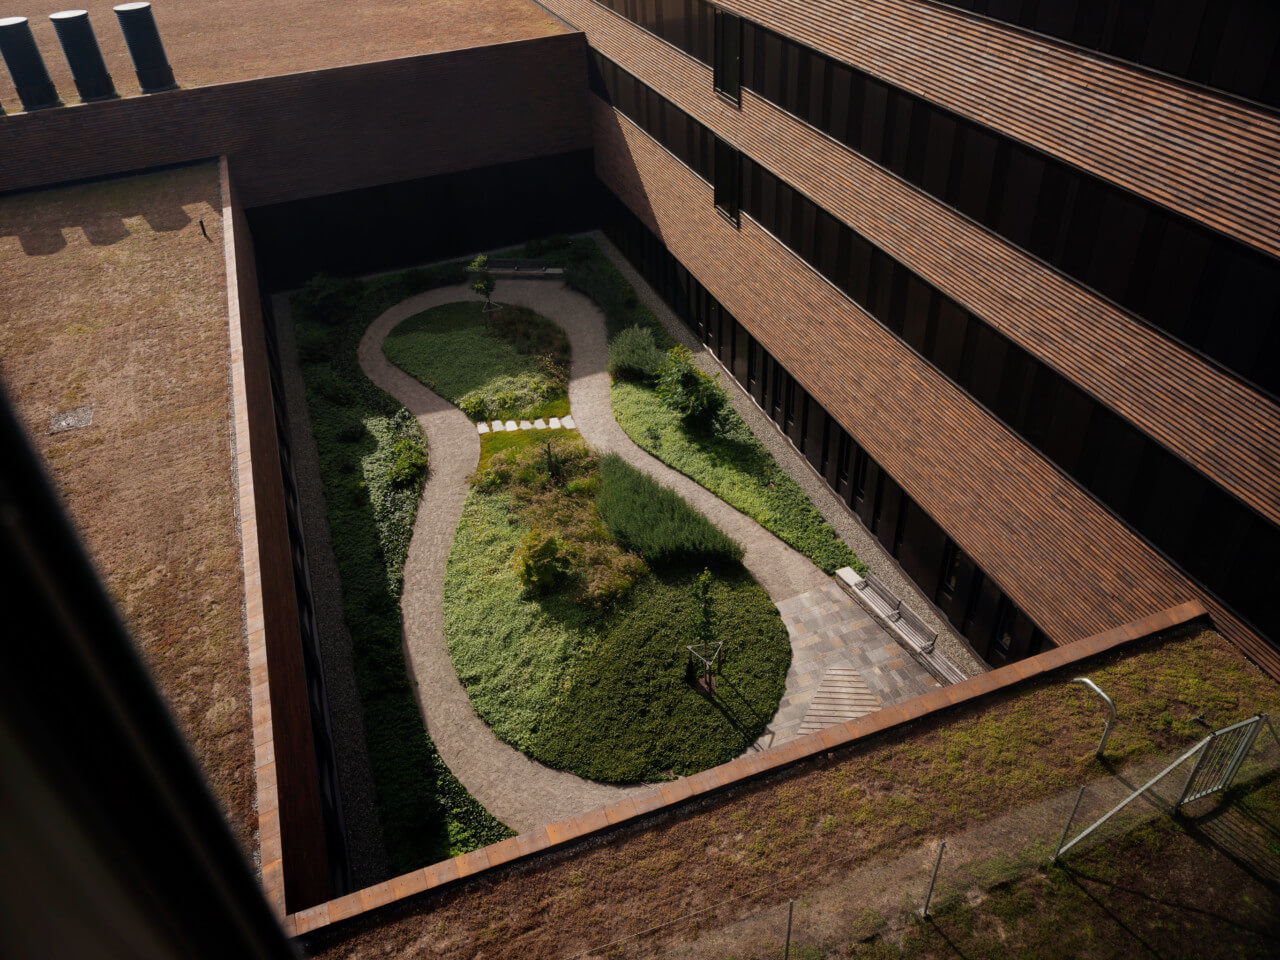 green internal courtyard surrounded by brick